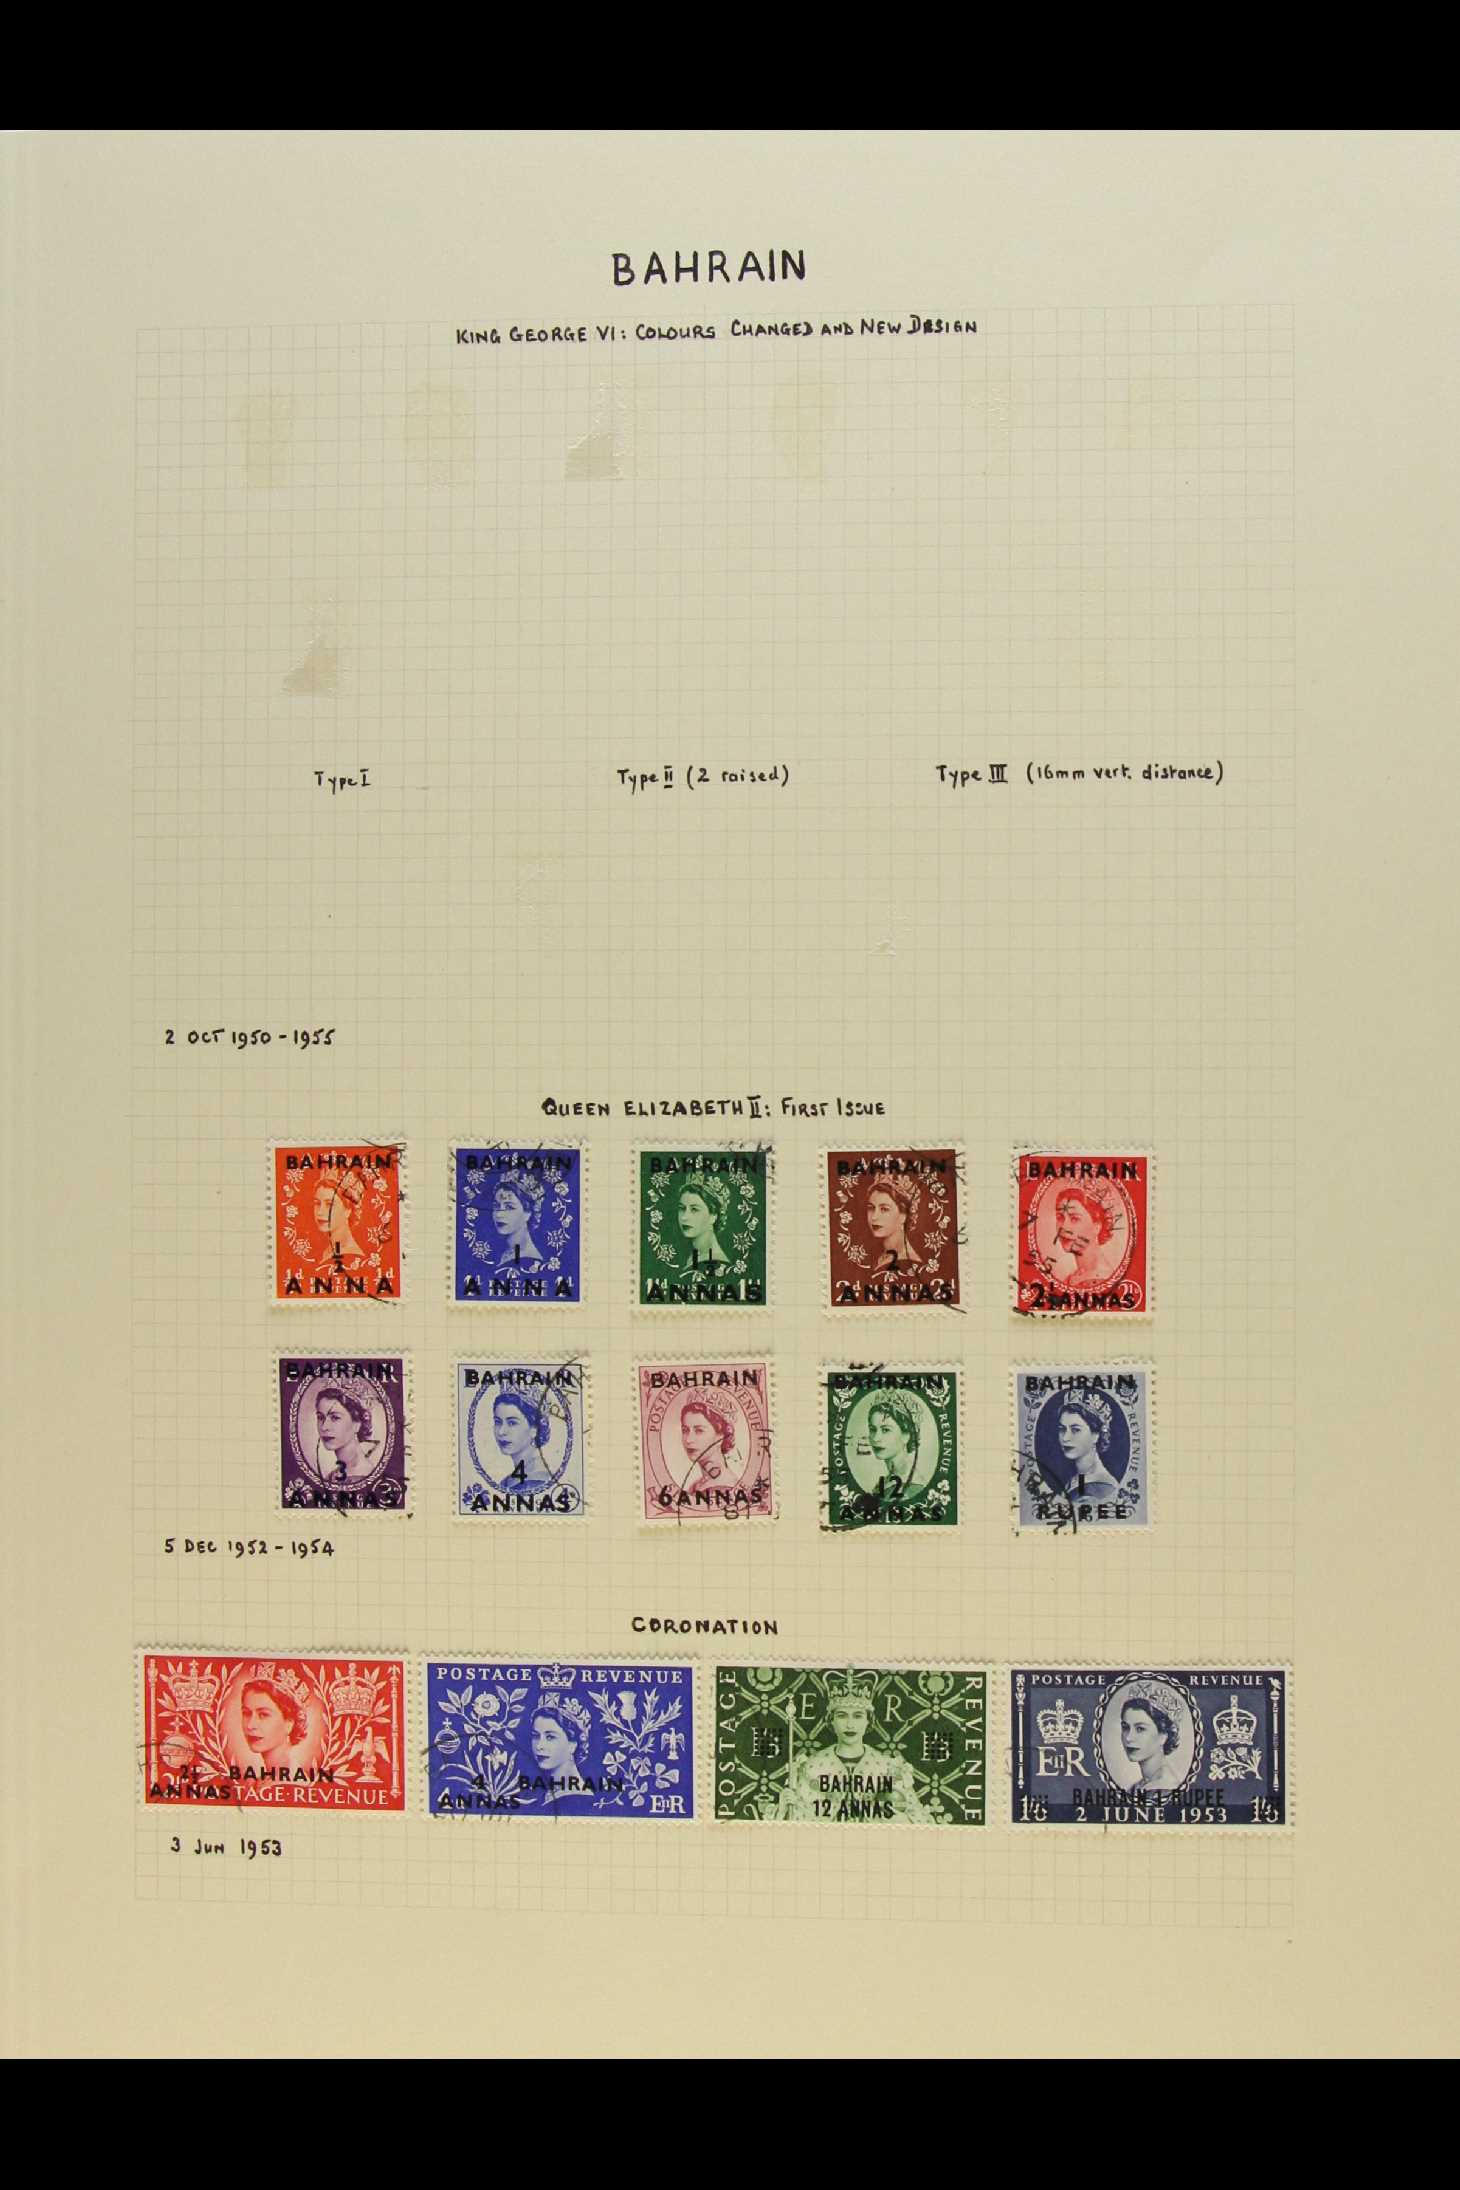 BAHRAIN 1950 - 1964 FINE USED COLLECTION on album pages includes a complete run of QEII issues (SG - Image 2 of 4